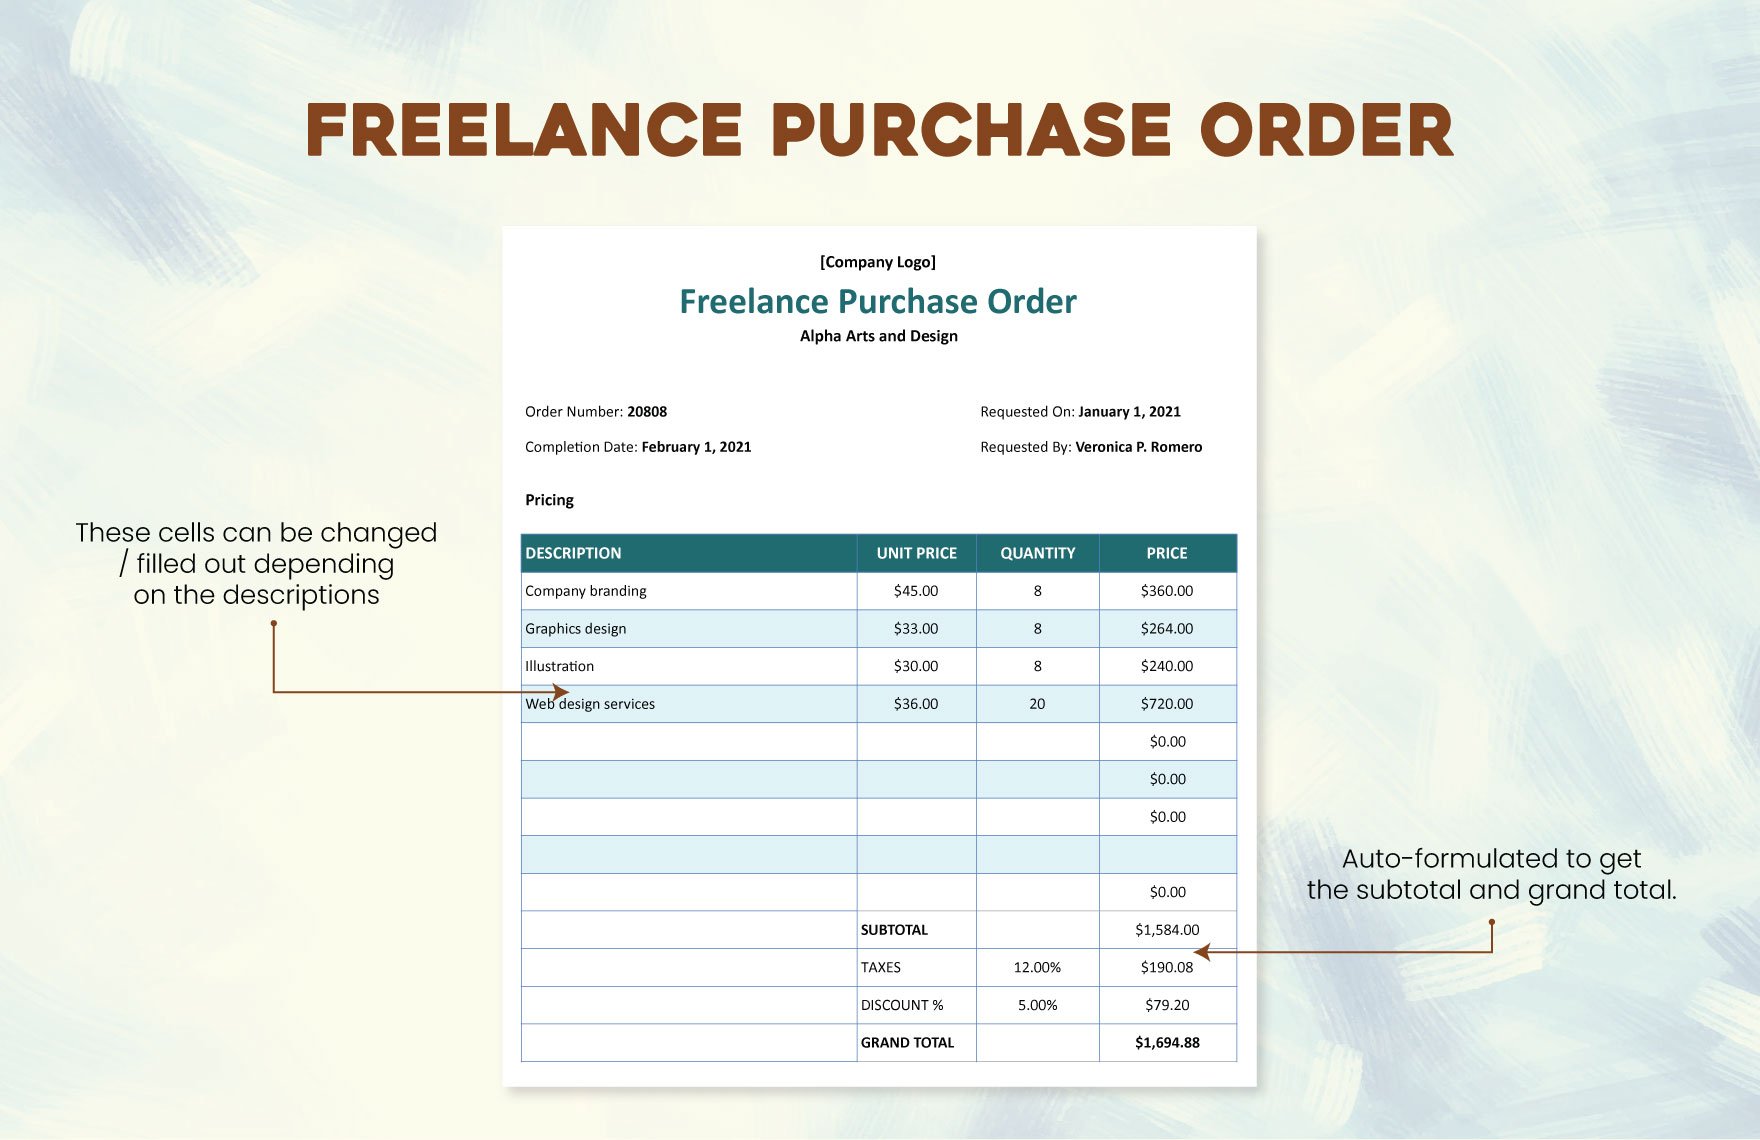 Freelance Purchase Order Template